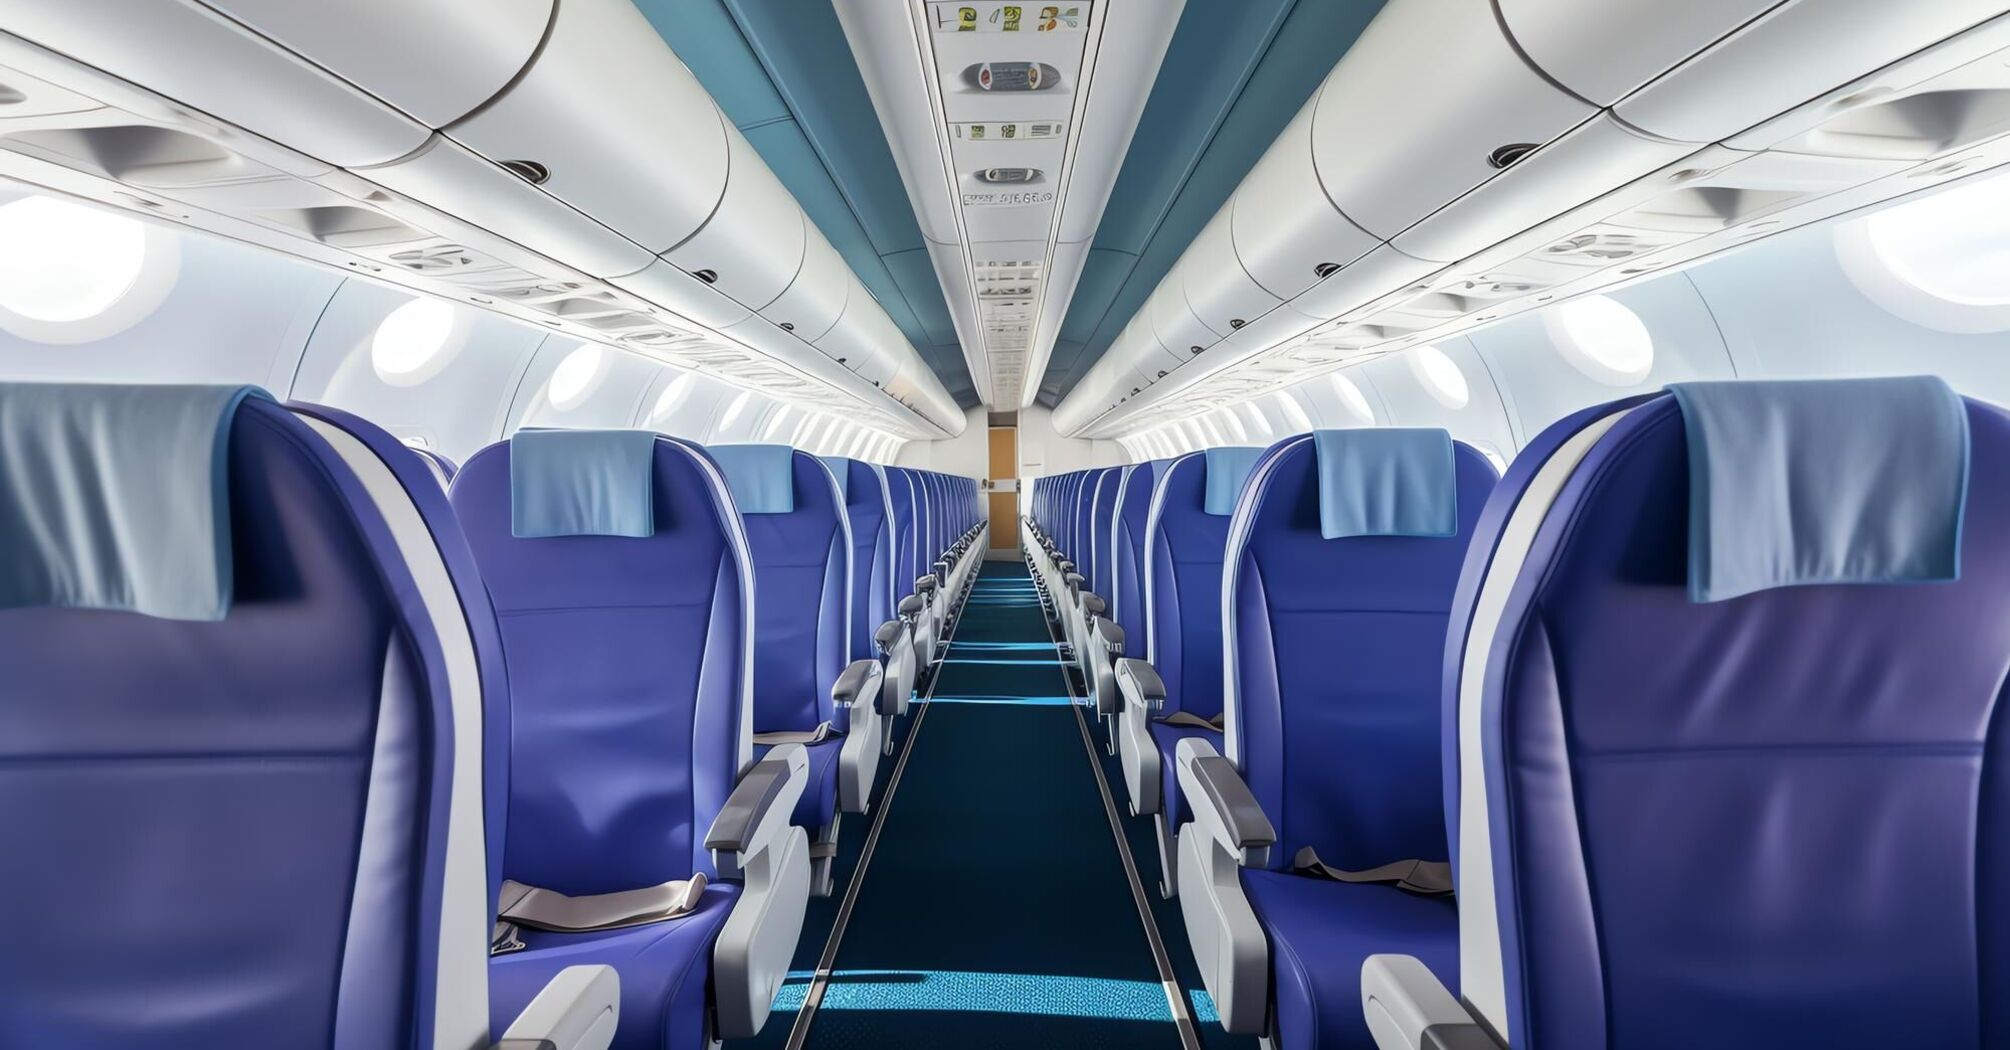 Types and causes of airplane cabin odor